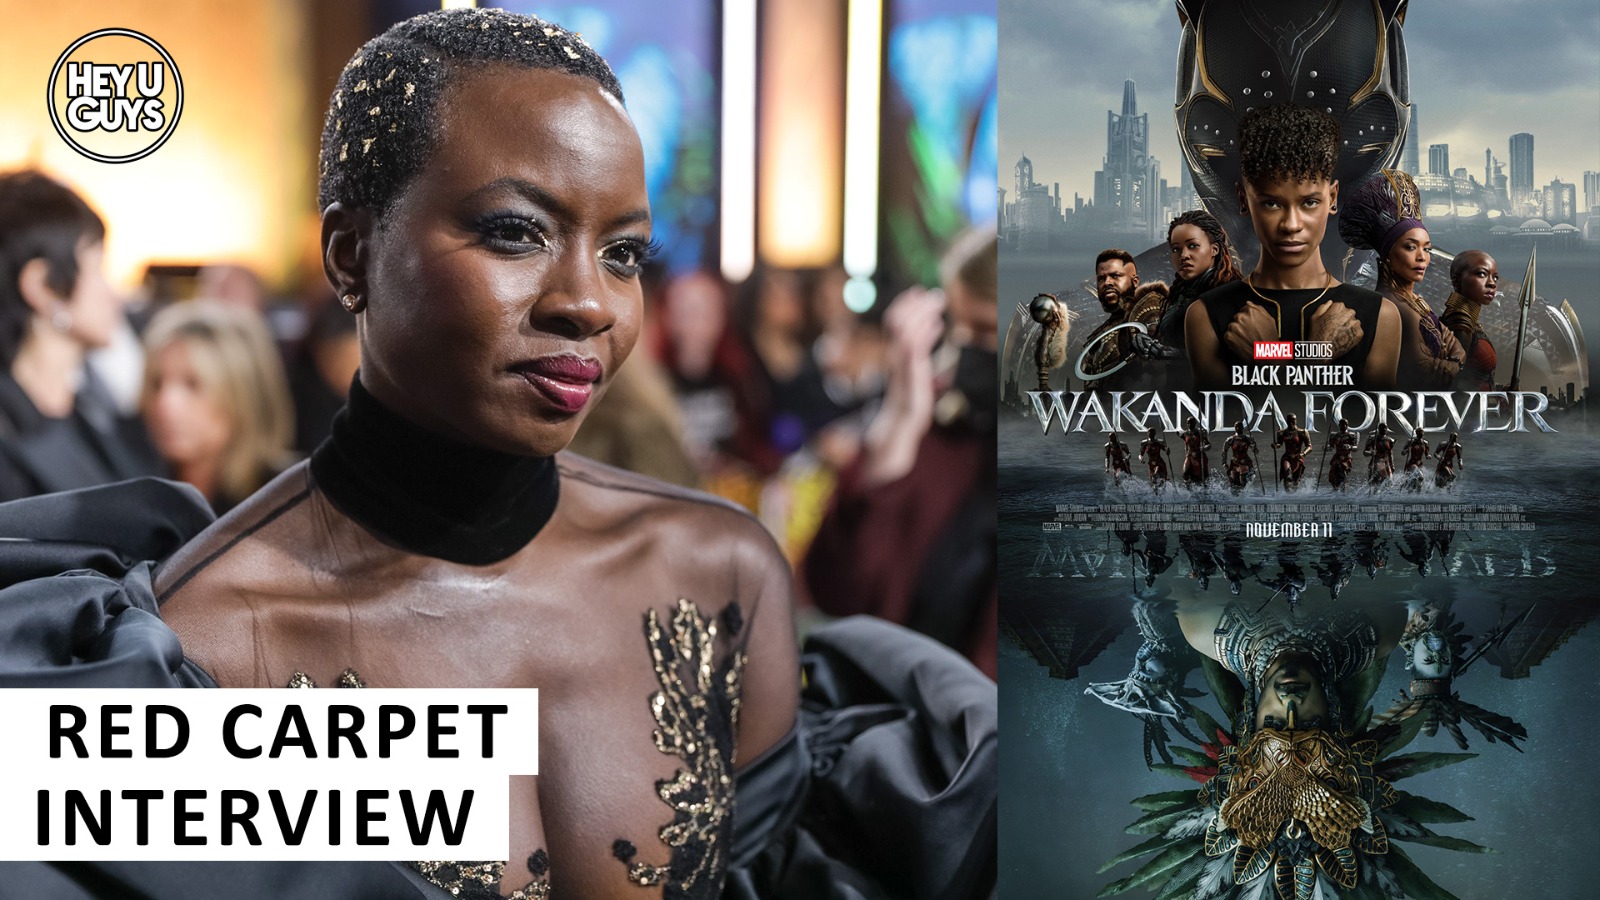 Black Panther Wakanda forever premiere interviews